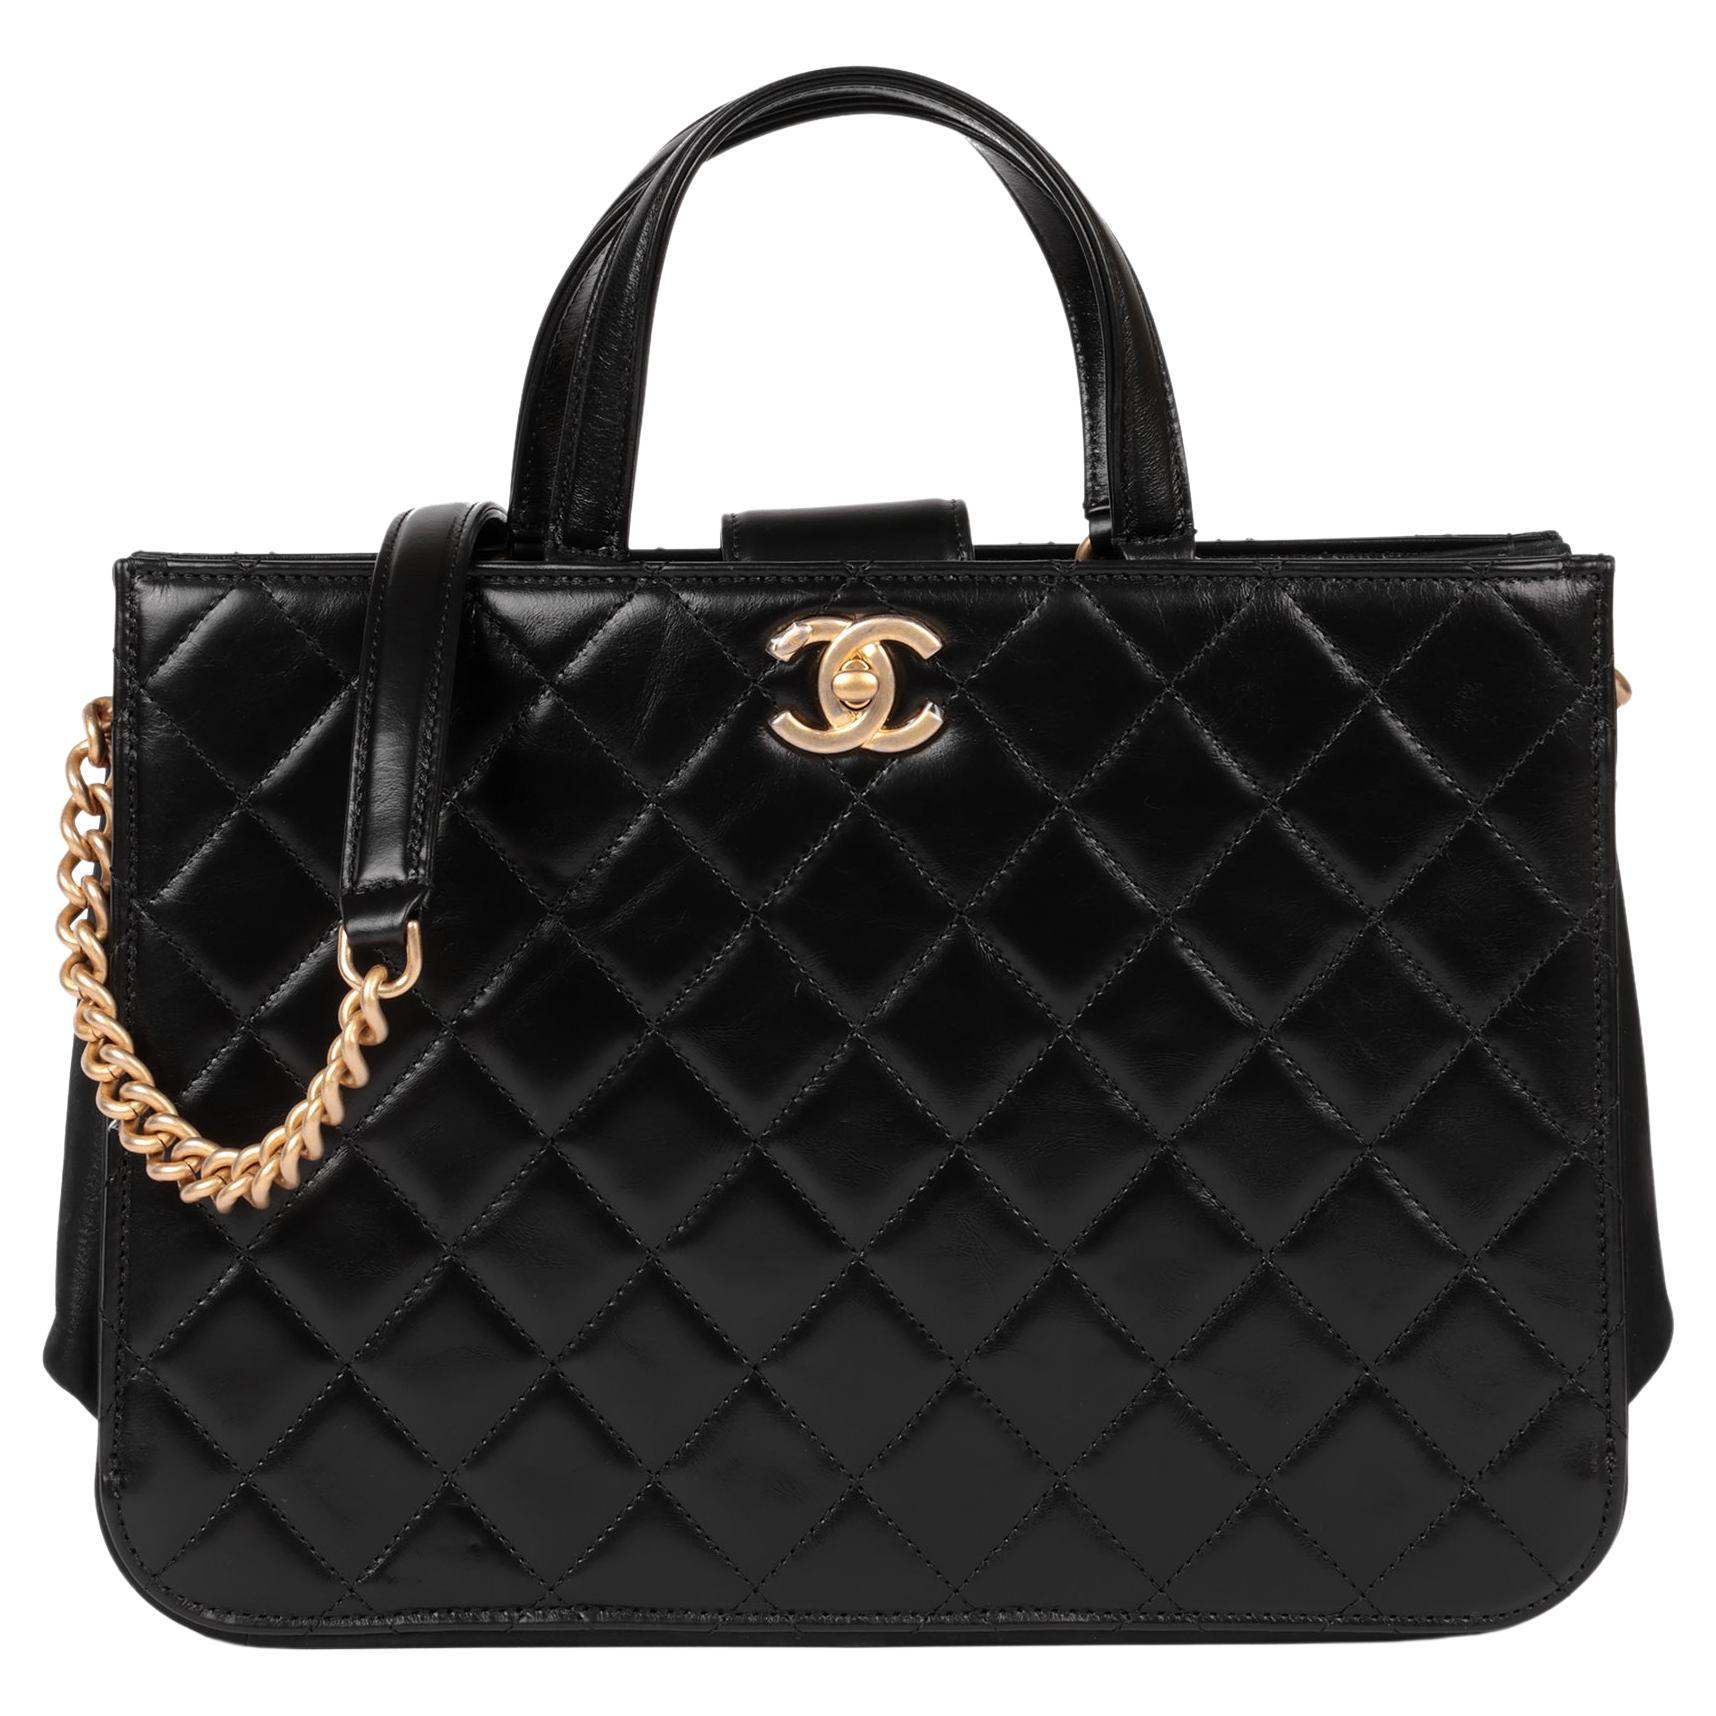 Chanel Black Quilted Calfskin Leather Small Straight-Lined Shoulder Tote